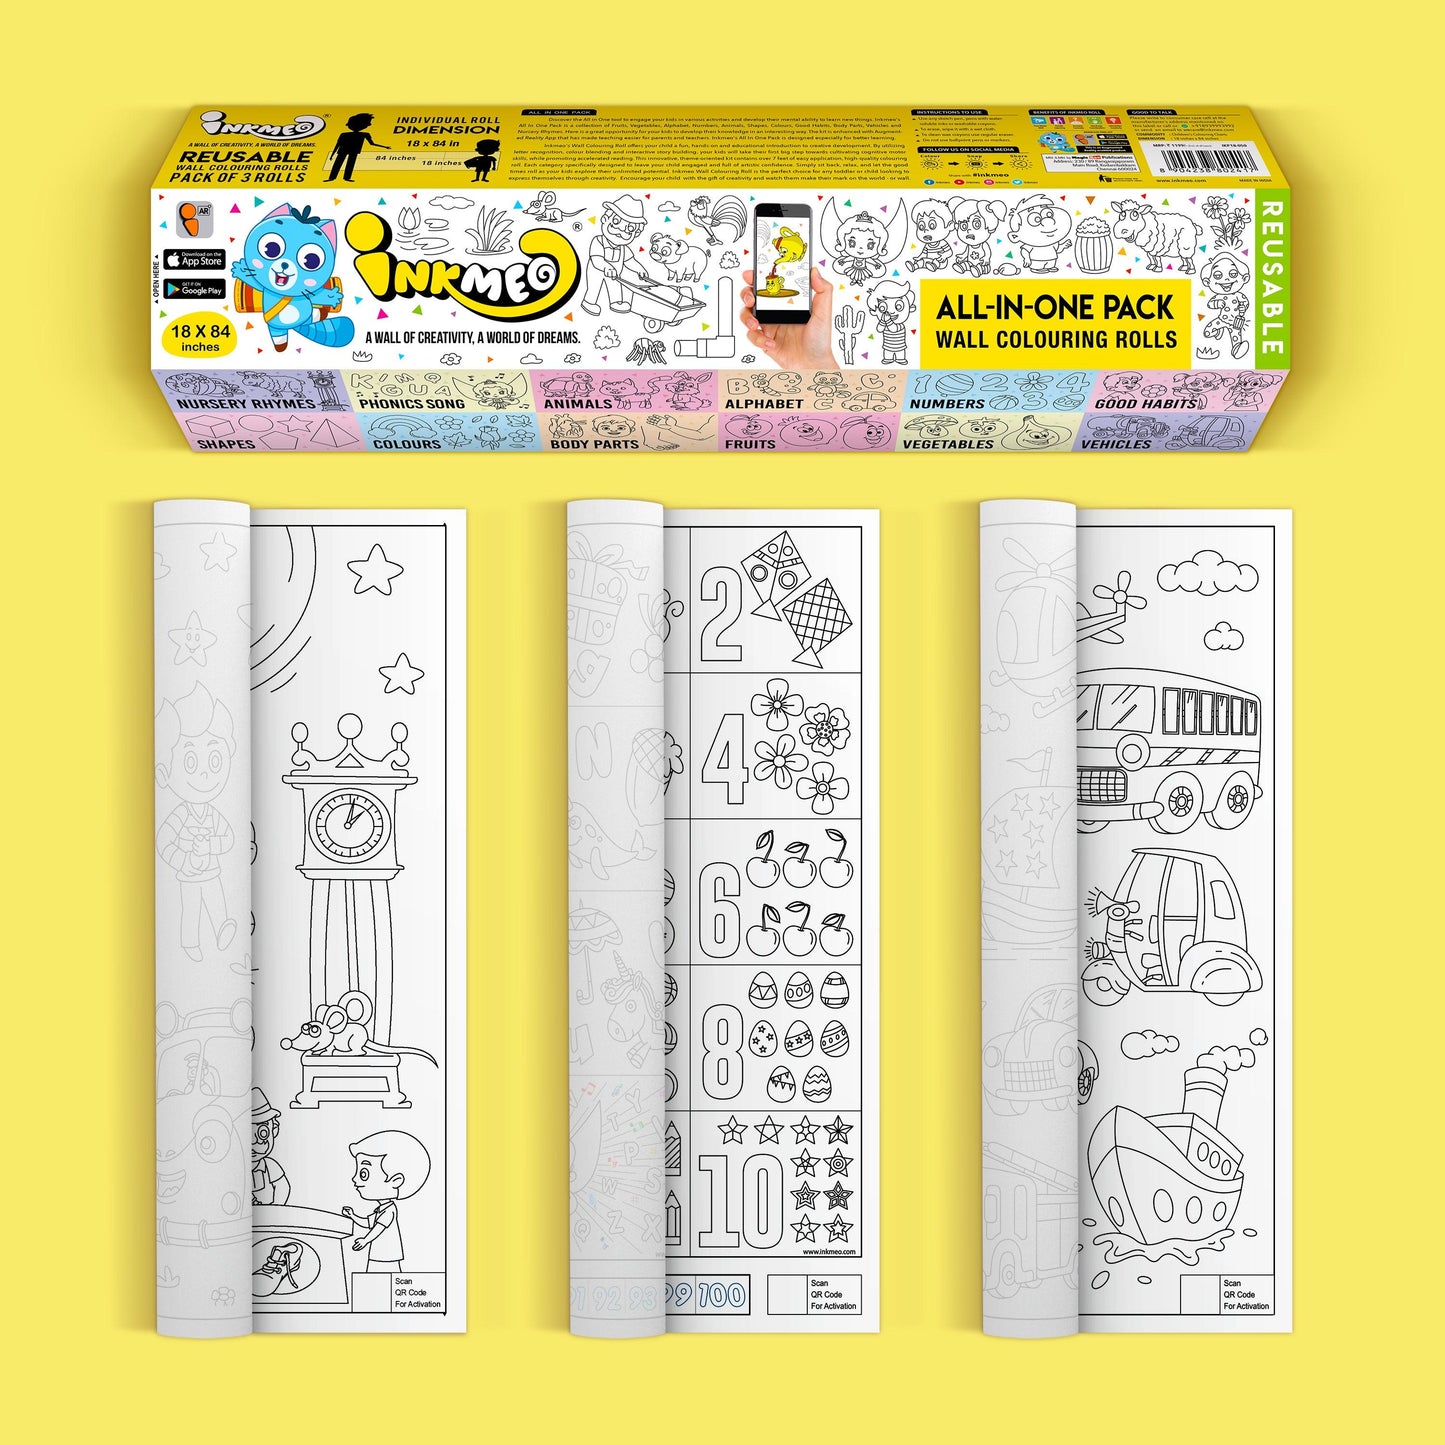 The image shows a yellow background with a large yellow box at the top. Below, there are three partially opened rolls with pictures on paper.